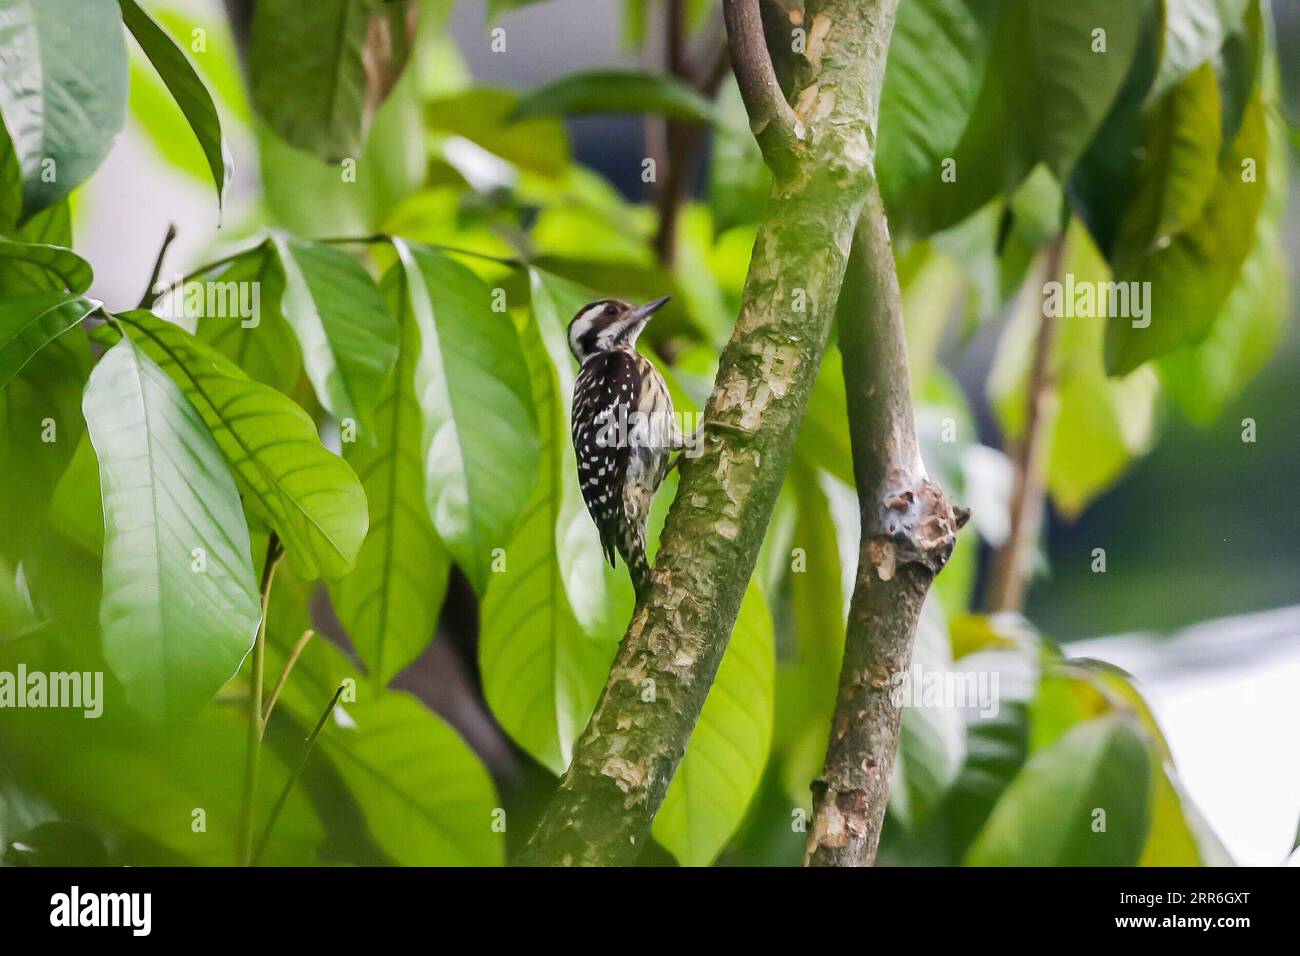 210215 -- MANILA, Feb. 15, 2021 -- A Philippine pygmy woodpecker is seen perched on a tree at a park in Manila, the Philippines on Feb. 15, 2021.  PHILIPPINES-MANILA-WILD BIRDS ROUELLExUMALI PUBLICATIONxNOTxINxCHN Stock Photo